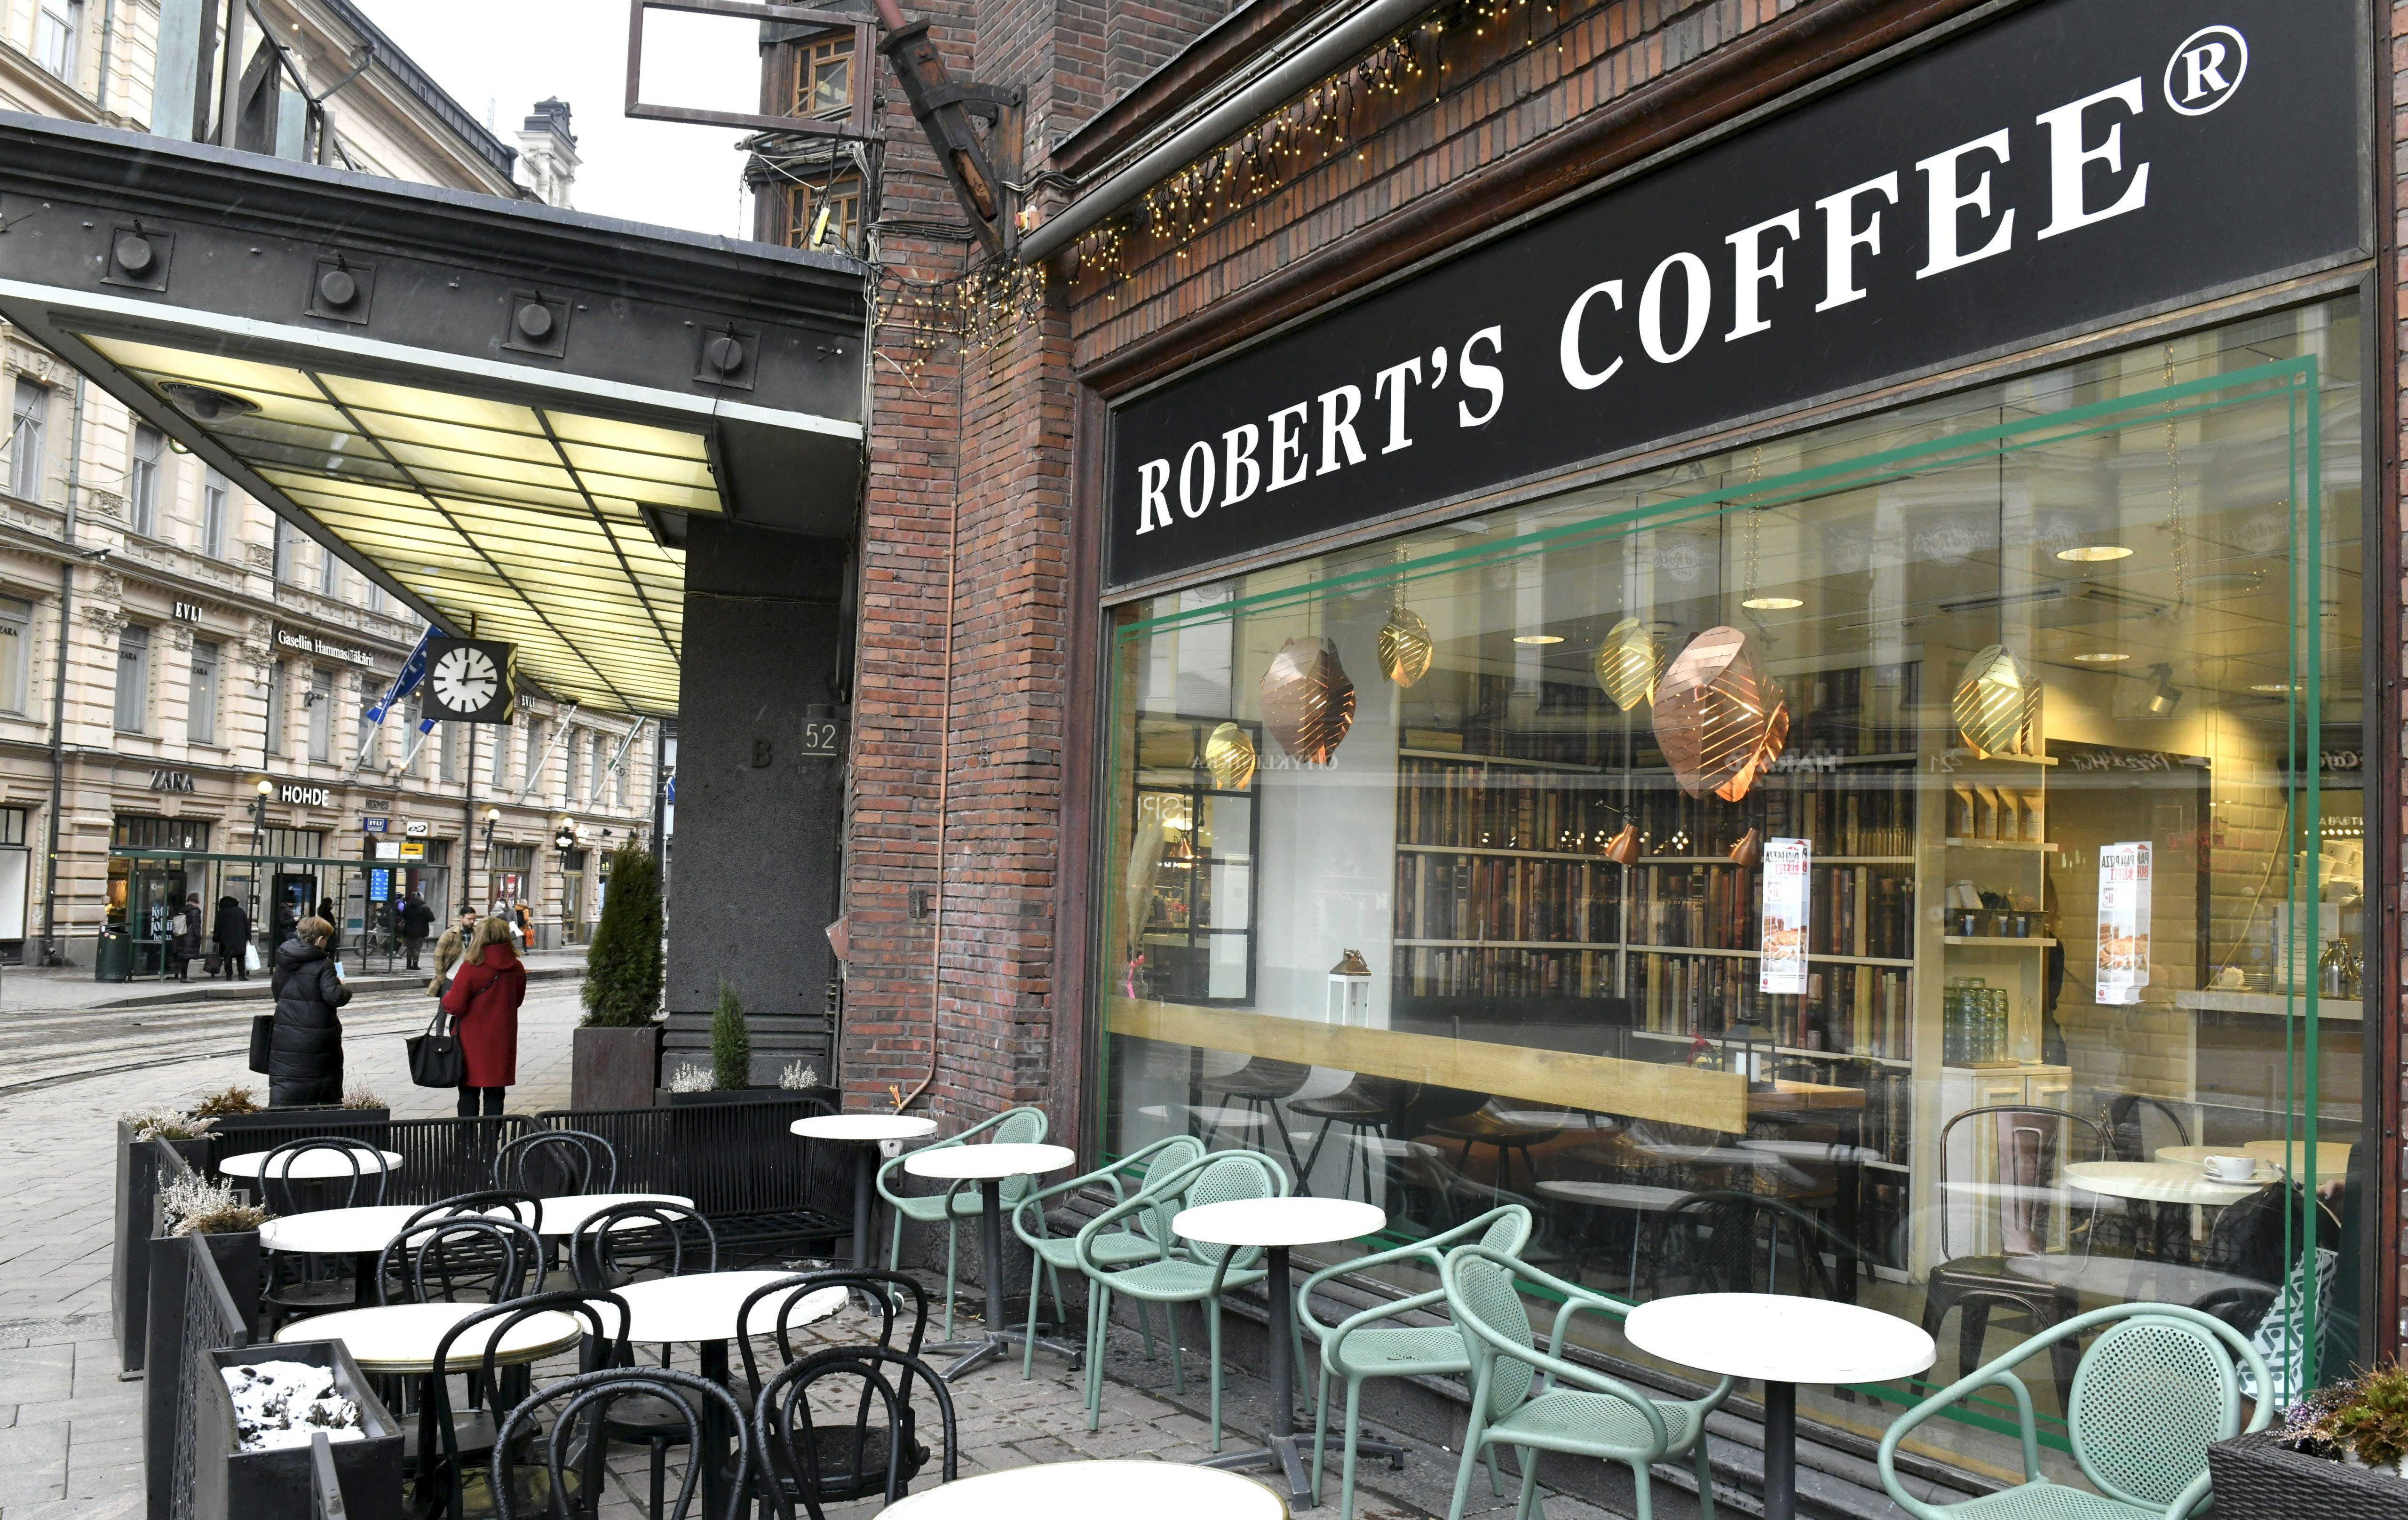 Employees of Robert’s Coffee House in Helsinki claim long days without breaks